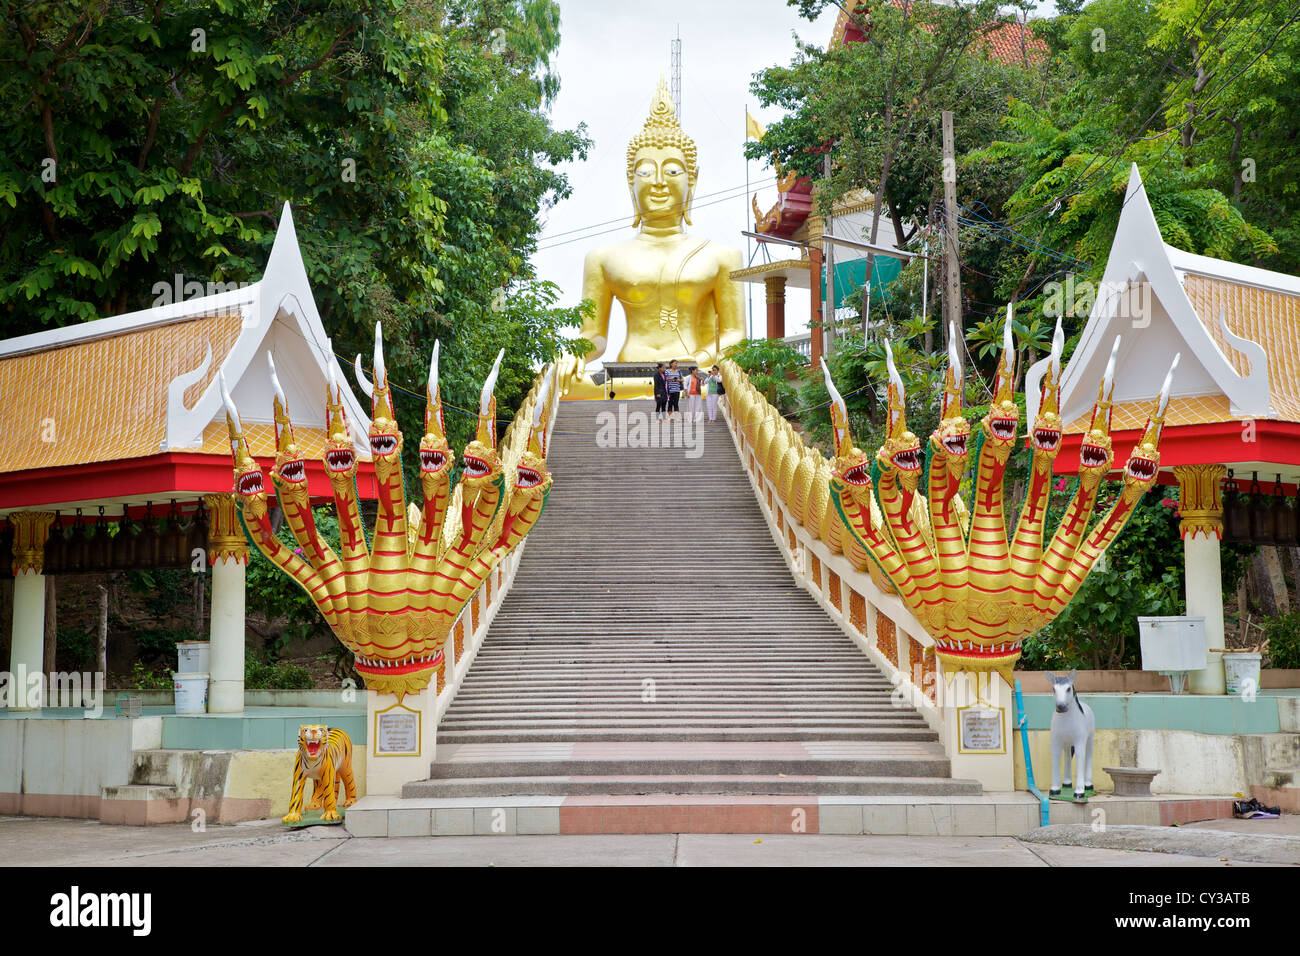 Steps leading up to the statue of the Big Buddha in Pattaya, Thailand Stock Photo